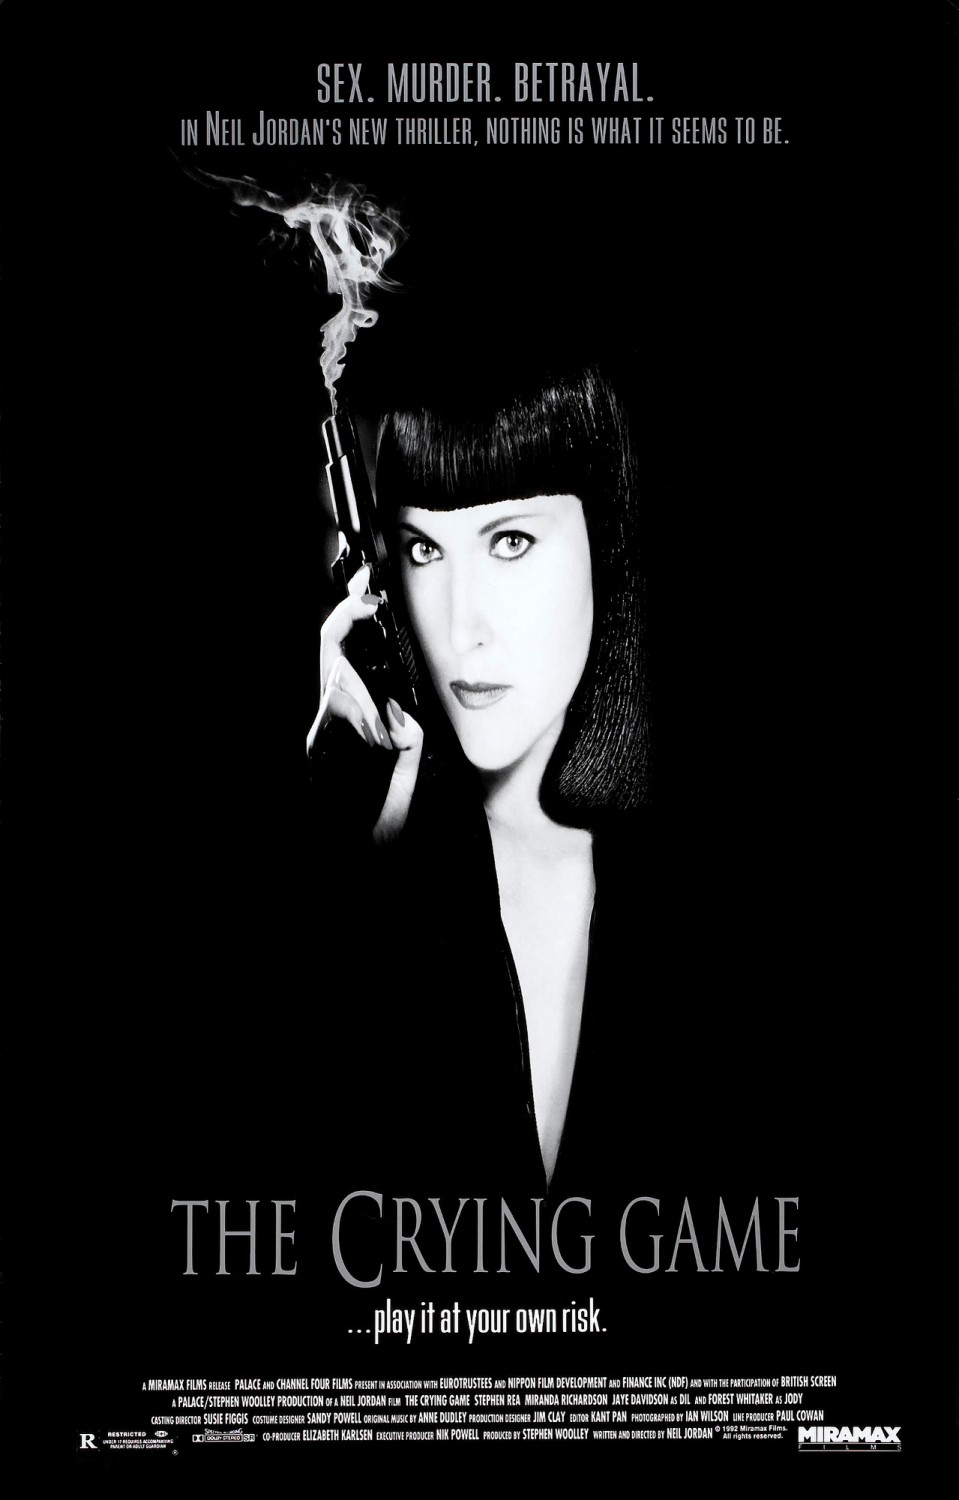 Movie Review: "The Crying Game" | Derrick's Blog